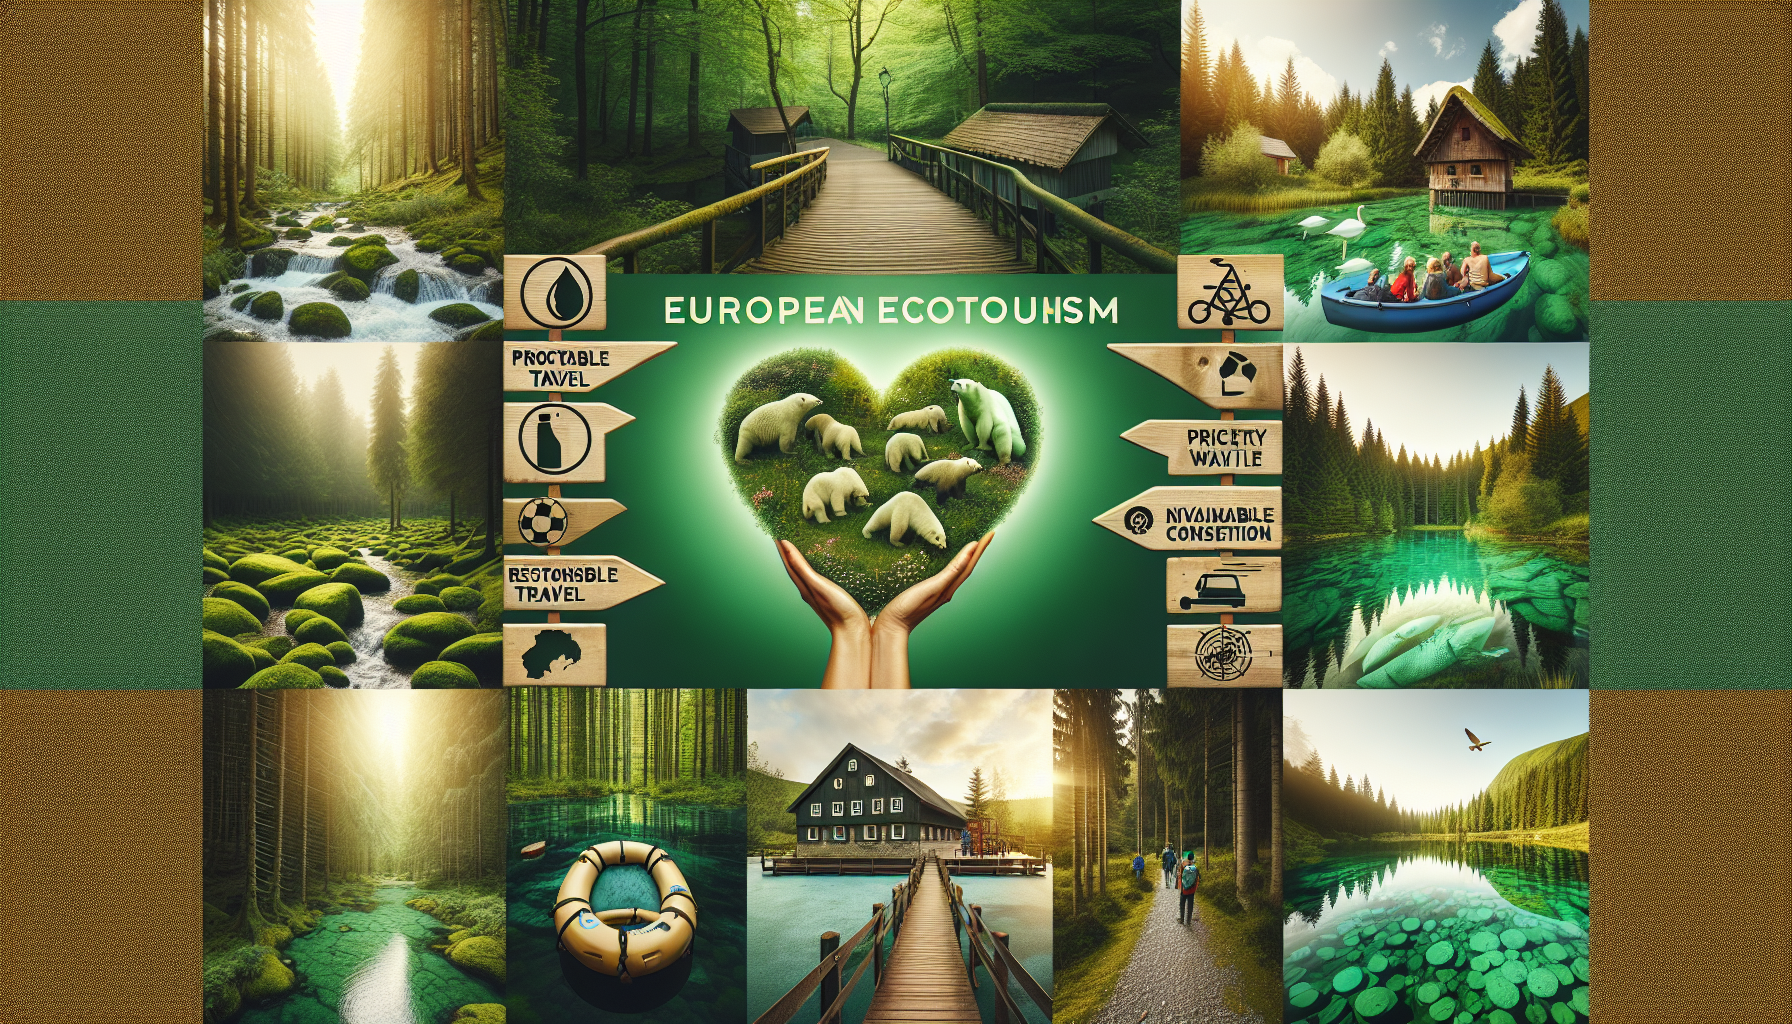 discover the potential of european ecotourism as a driving force for sustainable travel and nature conservation. join us in exploring the benefits and impact of ecotourism on local communities and the environment.